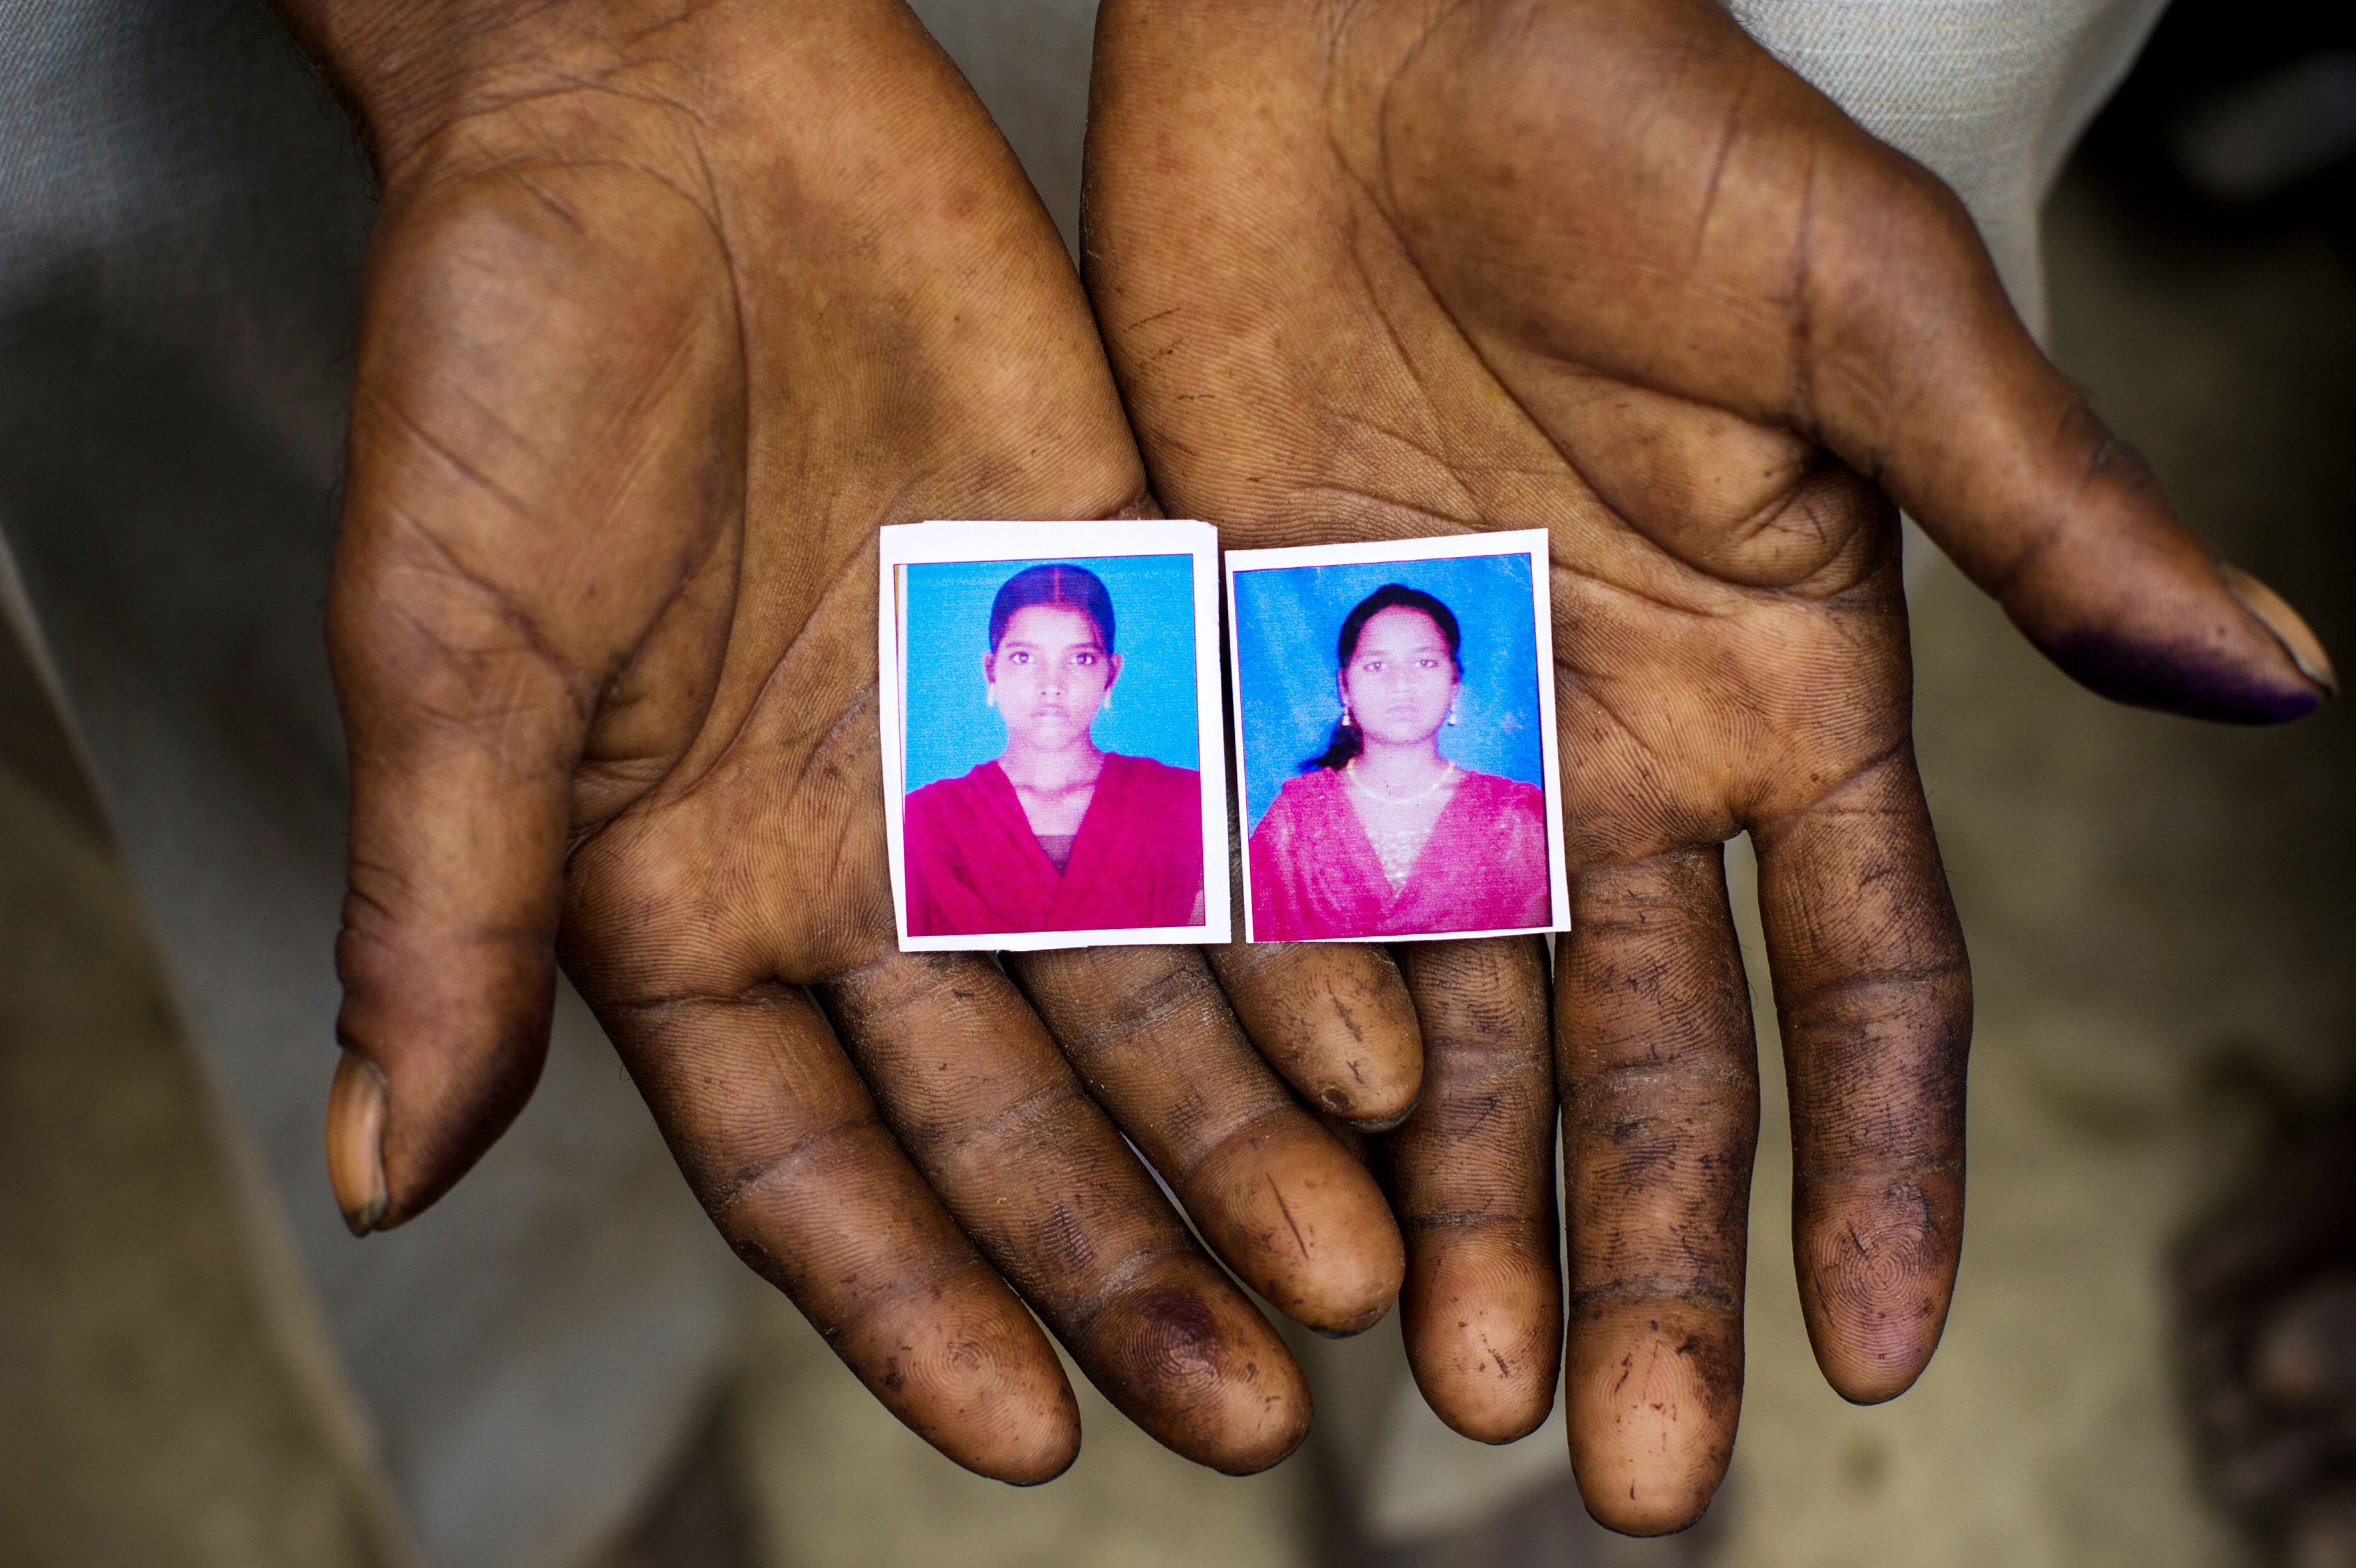 Sohan Lal (55) holds passport sized images in his hands of his daughter Murti (right) and niece Pushpa (left) in Katra Sadatganj village, Uttar Pradesh, India on May 30, 2014.